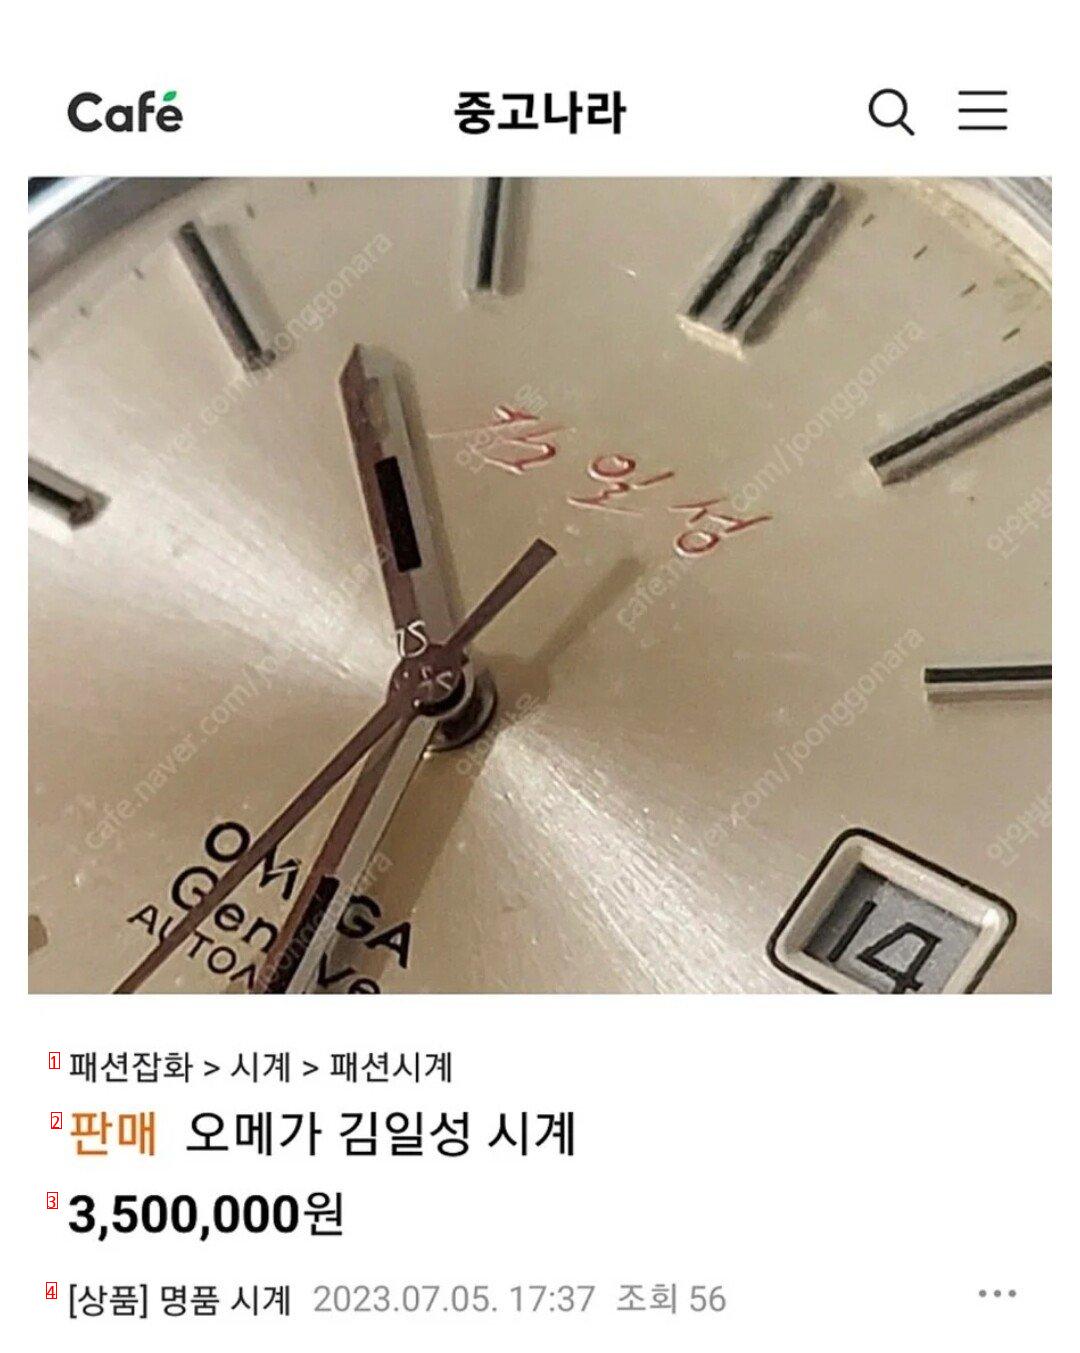 Omega watch that was posted on Used World for 3.5 million won jpg